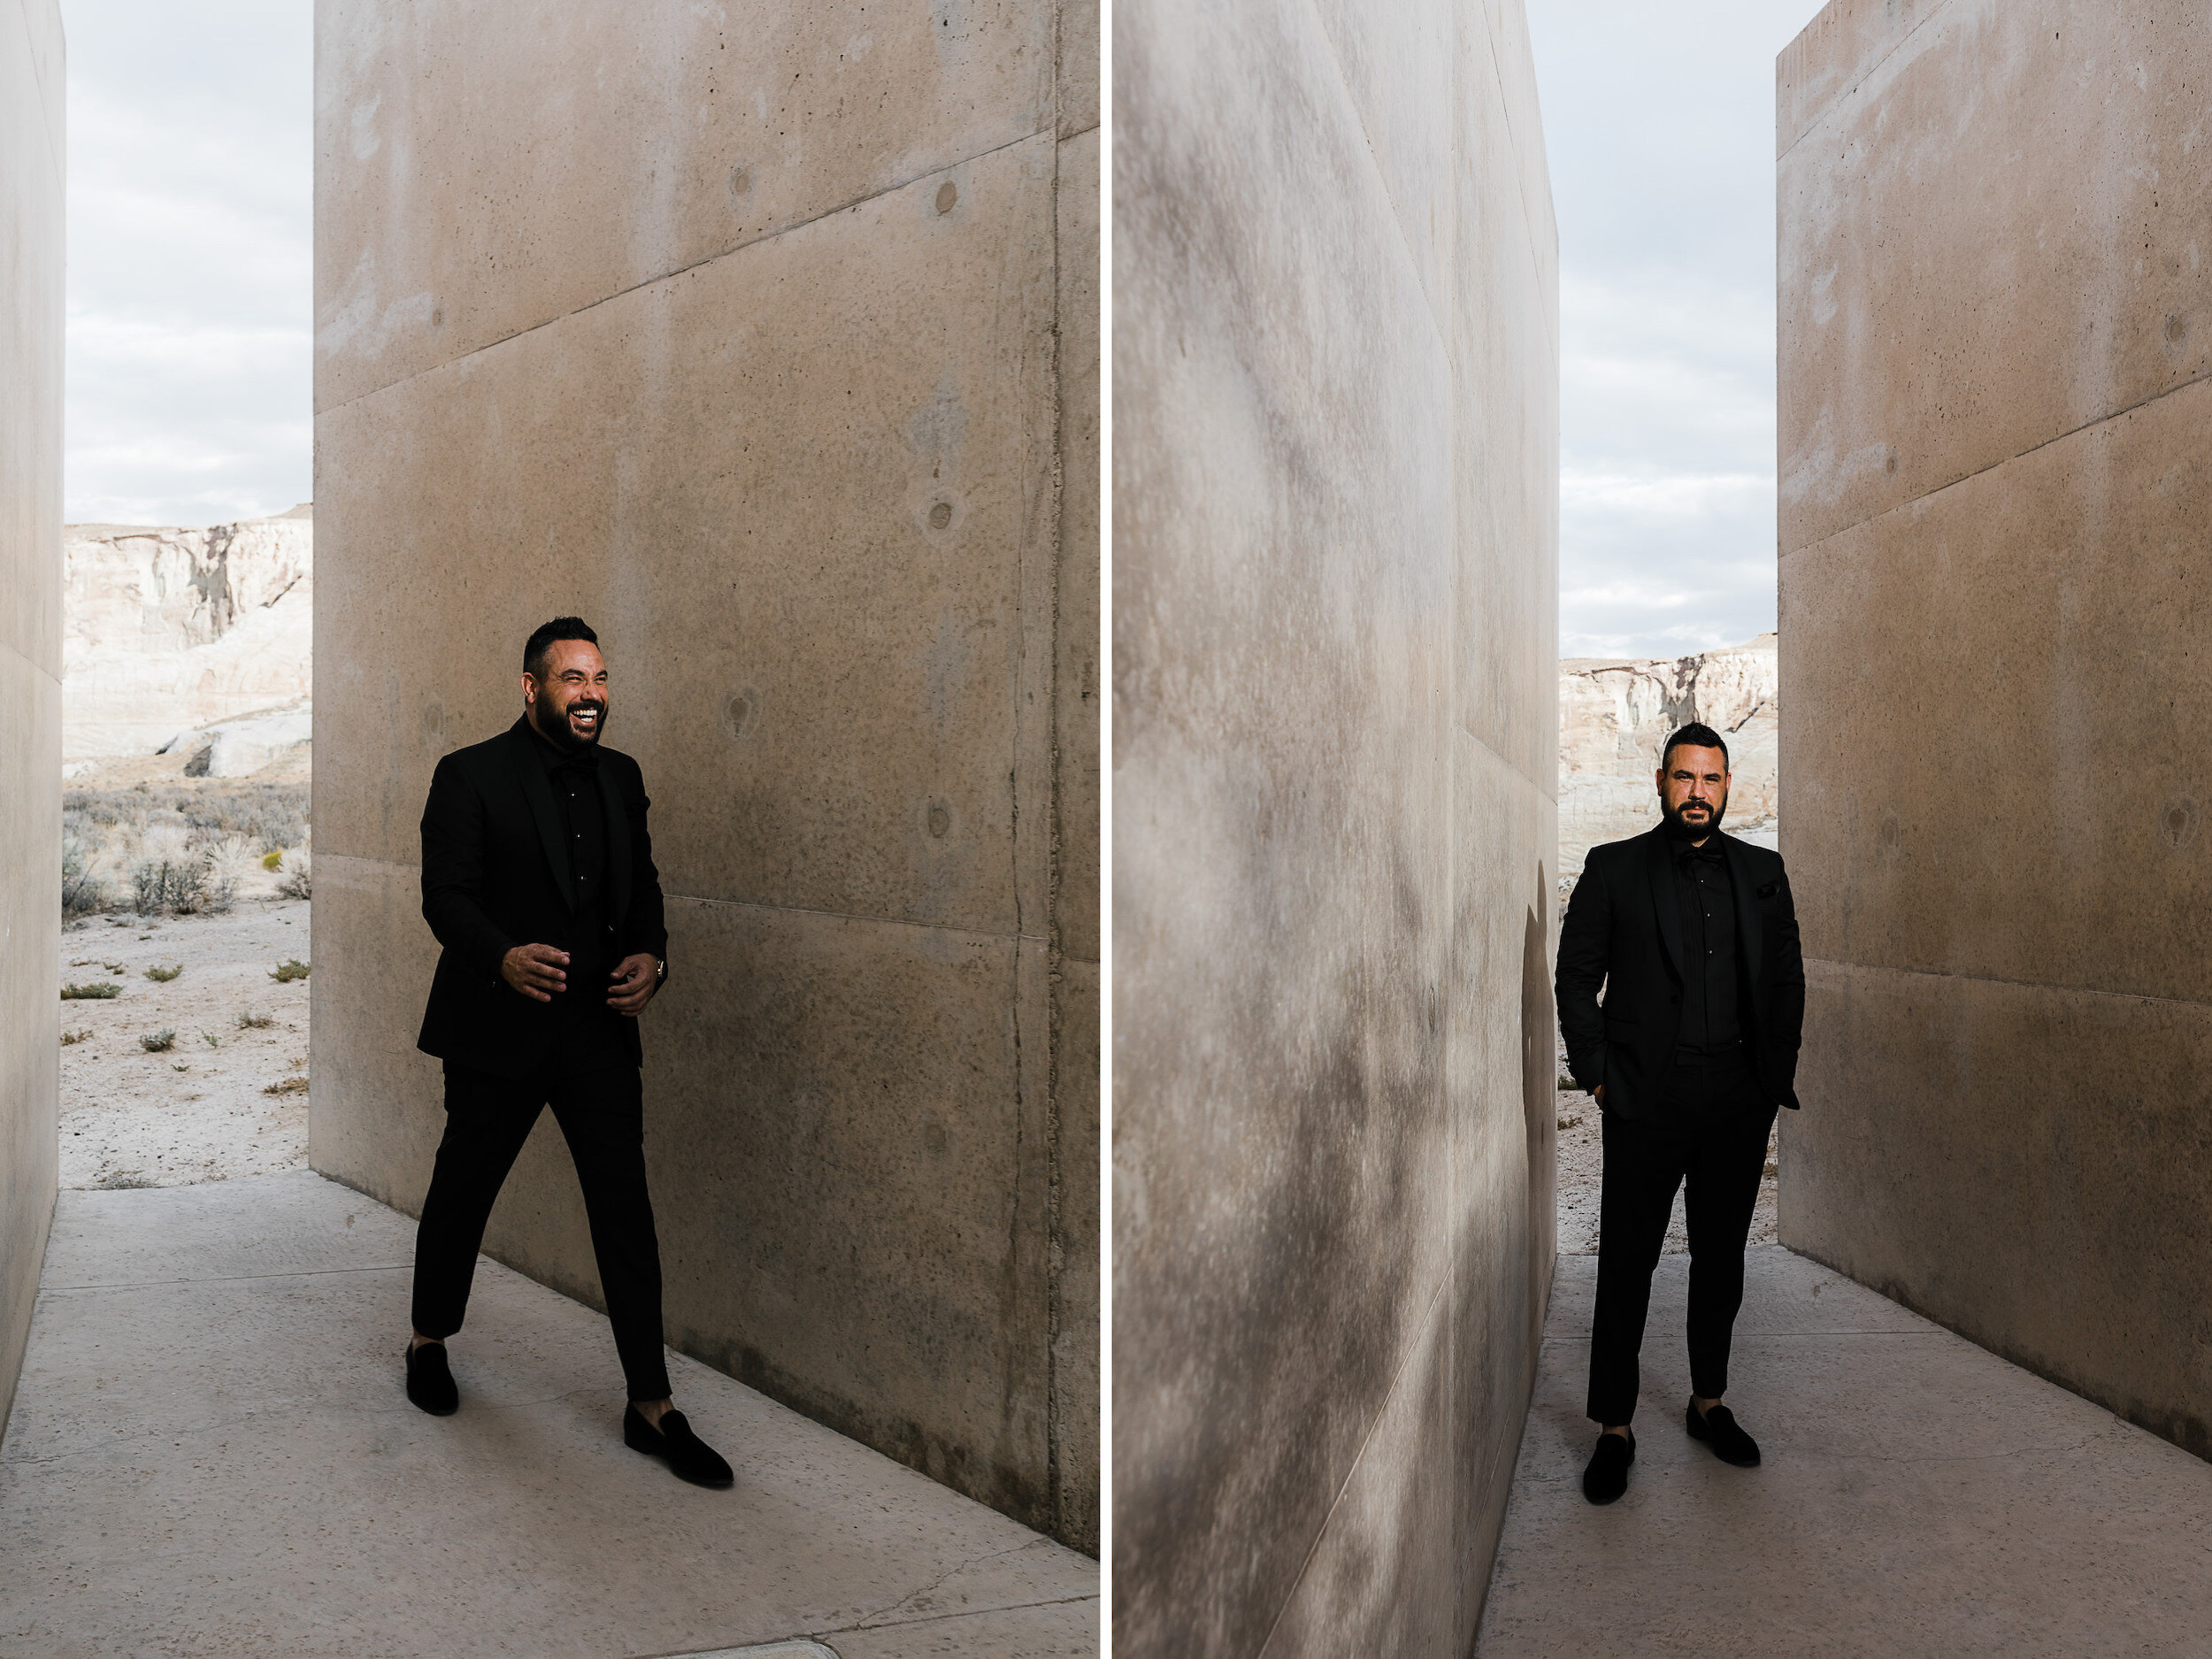 Amangiri wedding photographer for a luxury aman elopement | The Hearnes Photography